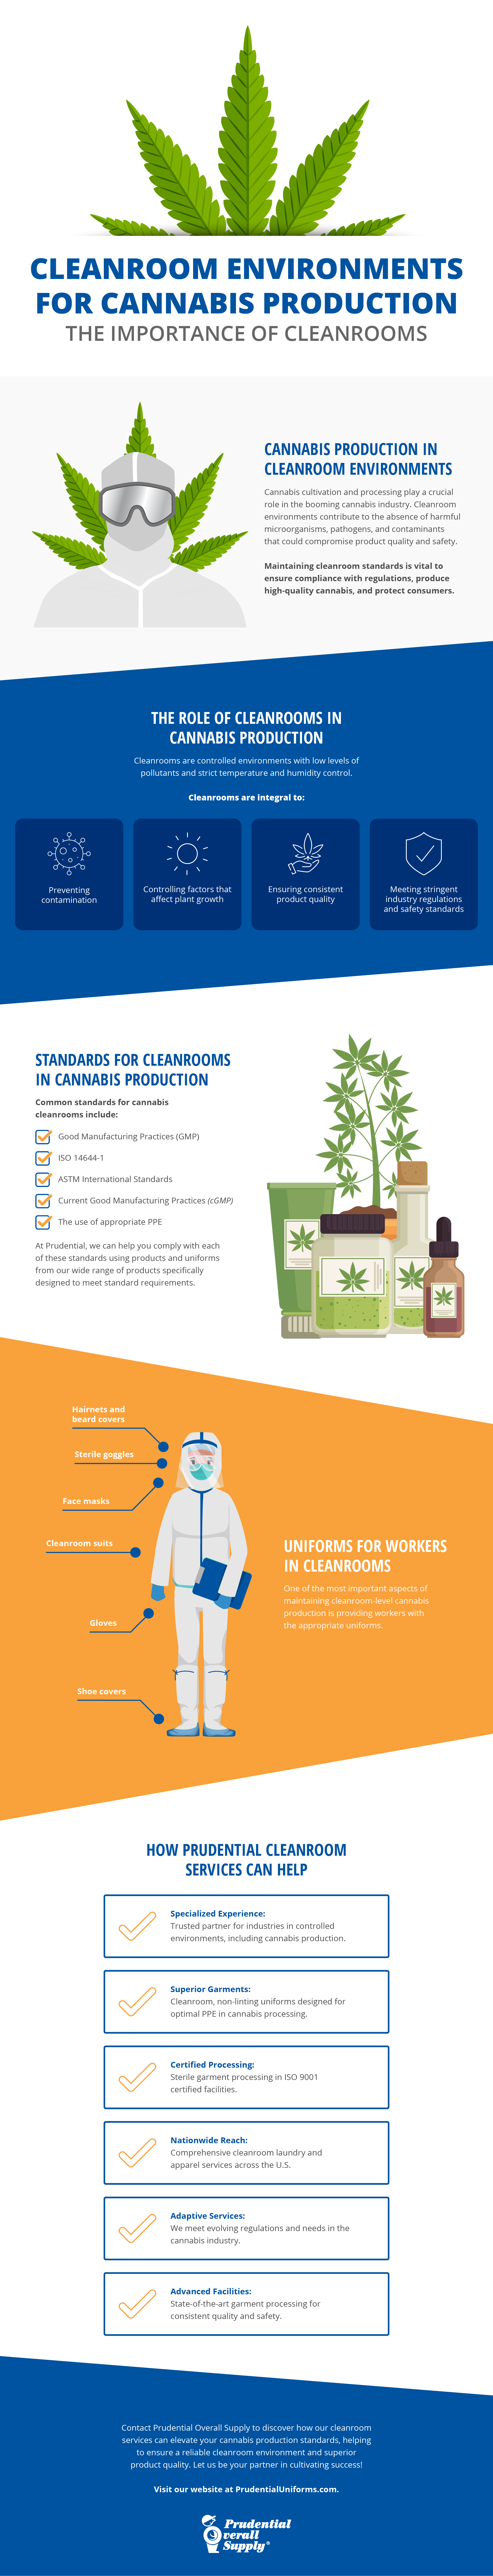  Importance of Cleanrooms for Cannabis Production Infographic